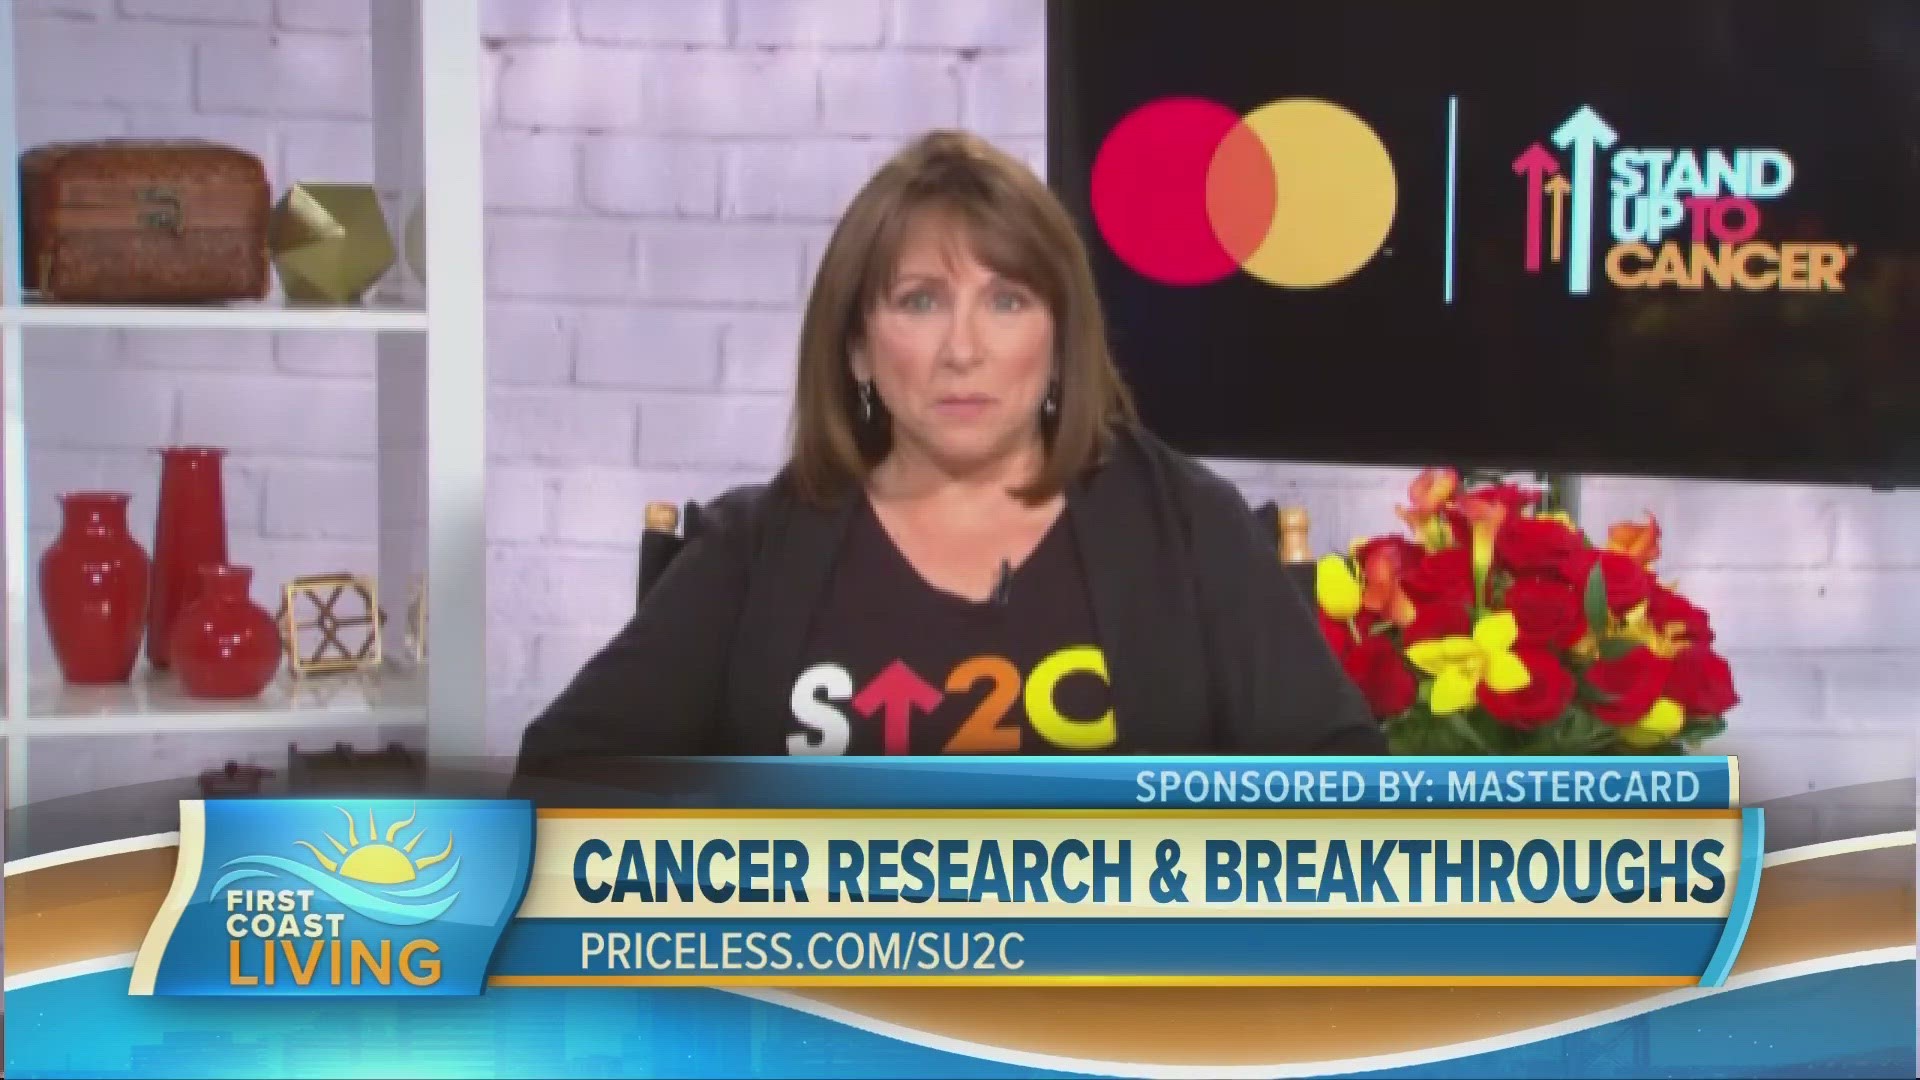 Sue Schwartz, cancer advocate and co-founder of the non-profit Stand Up To Cancer, discusses Stand Up To Cancer’s mission and how we can all help.